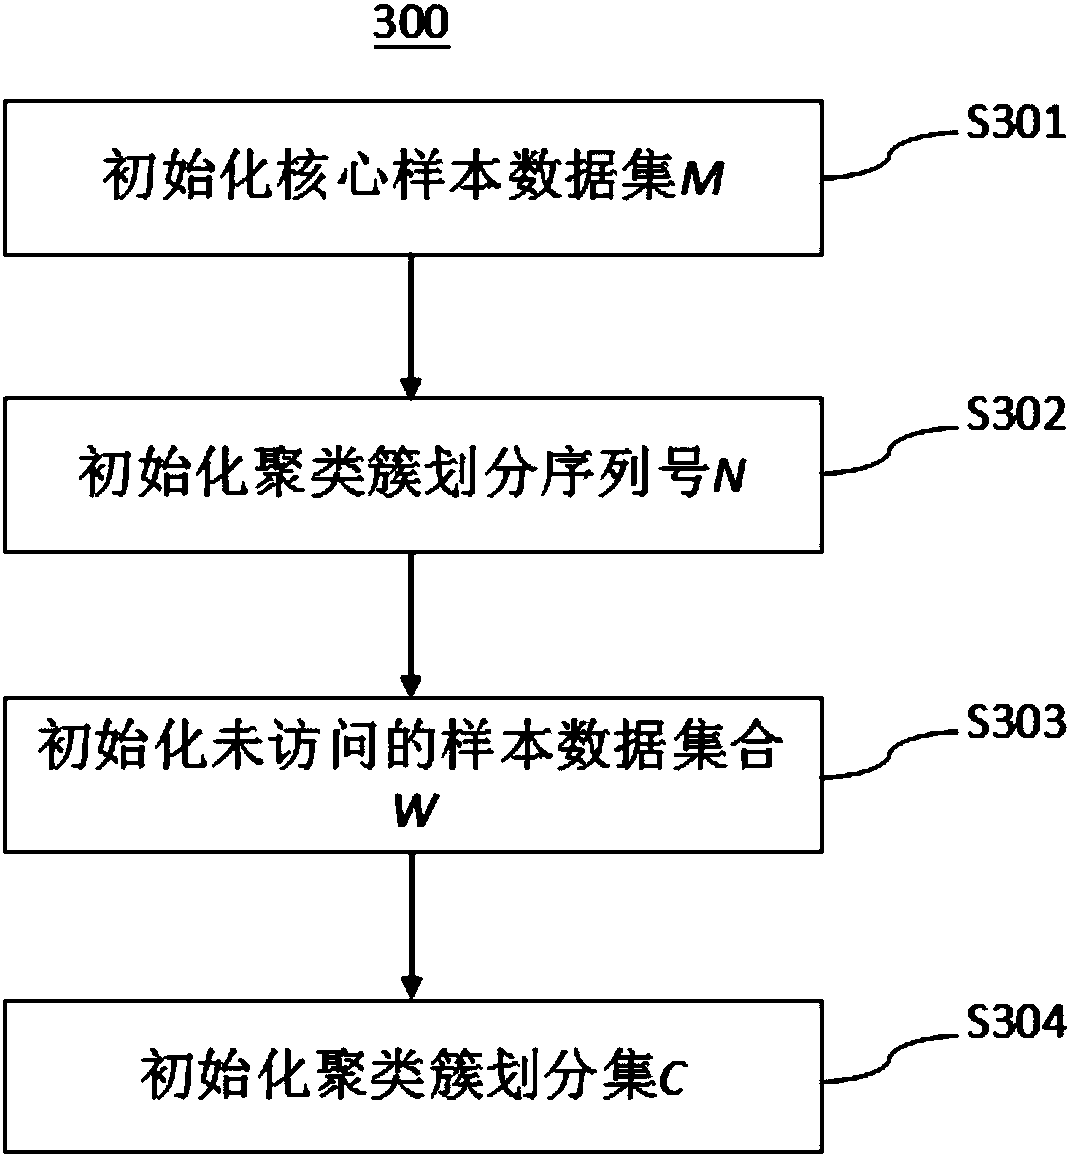 Path planning method and system based on scene classification